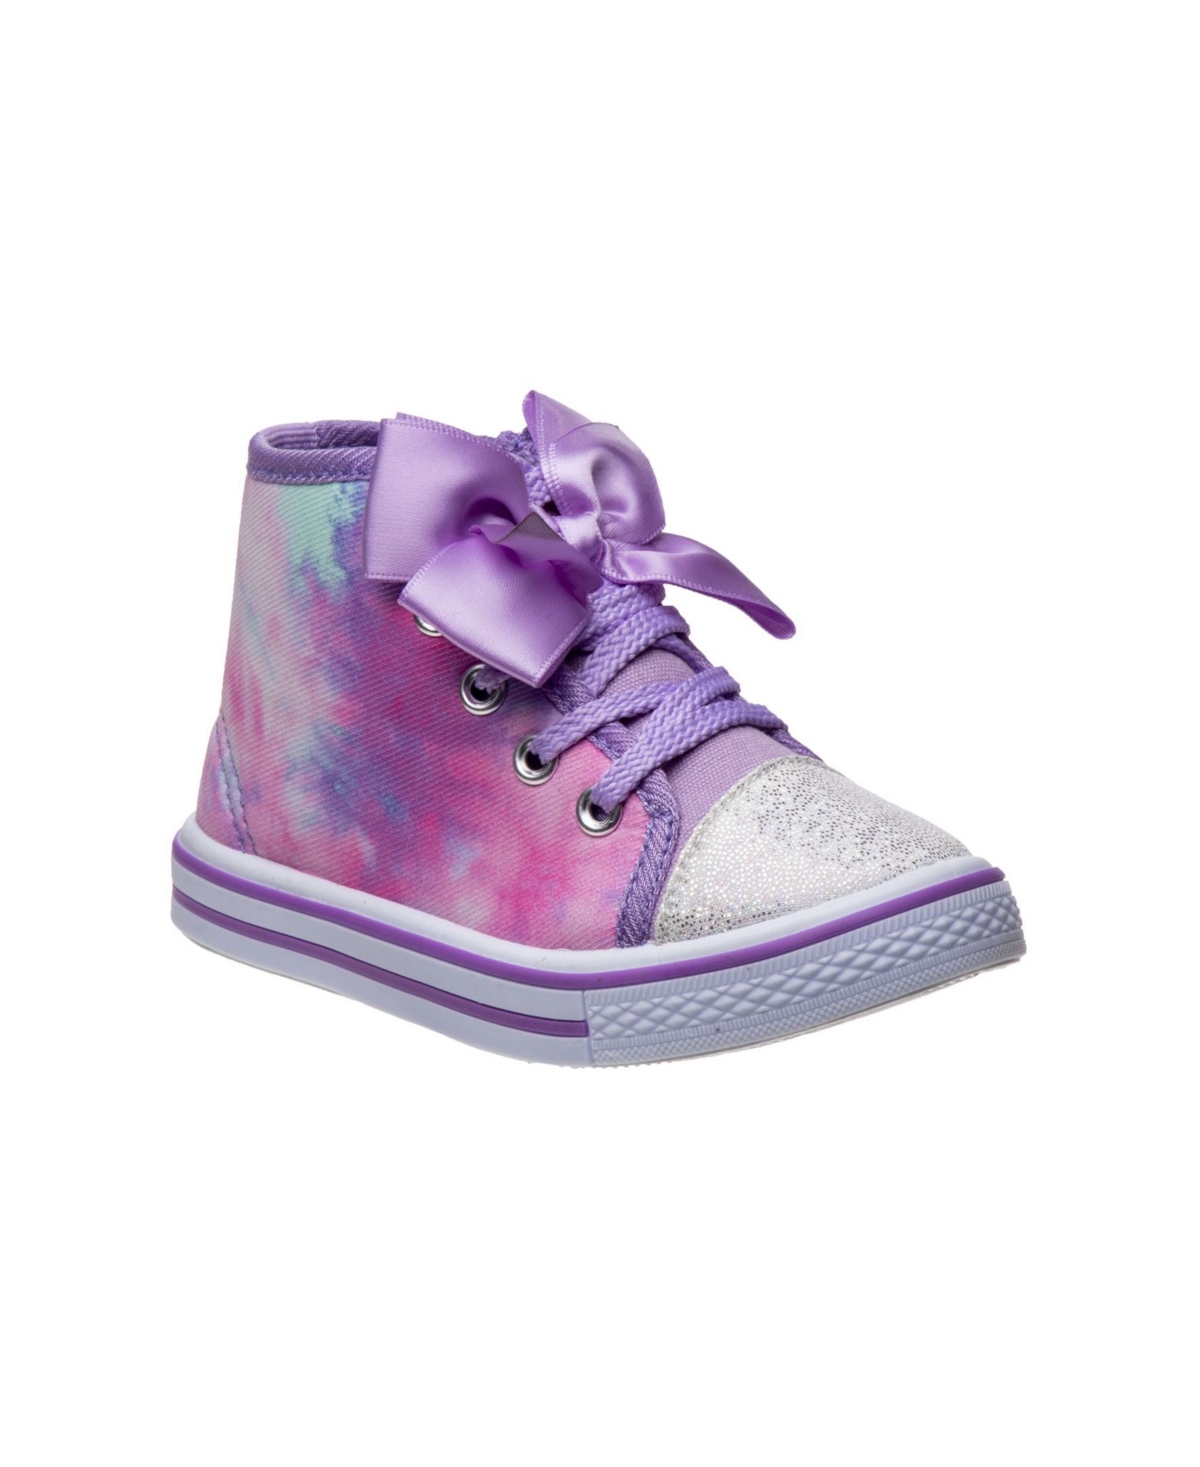 Laura Ashley Toddler Girls Signature Bow High Top Sneakers In Purple